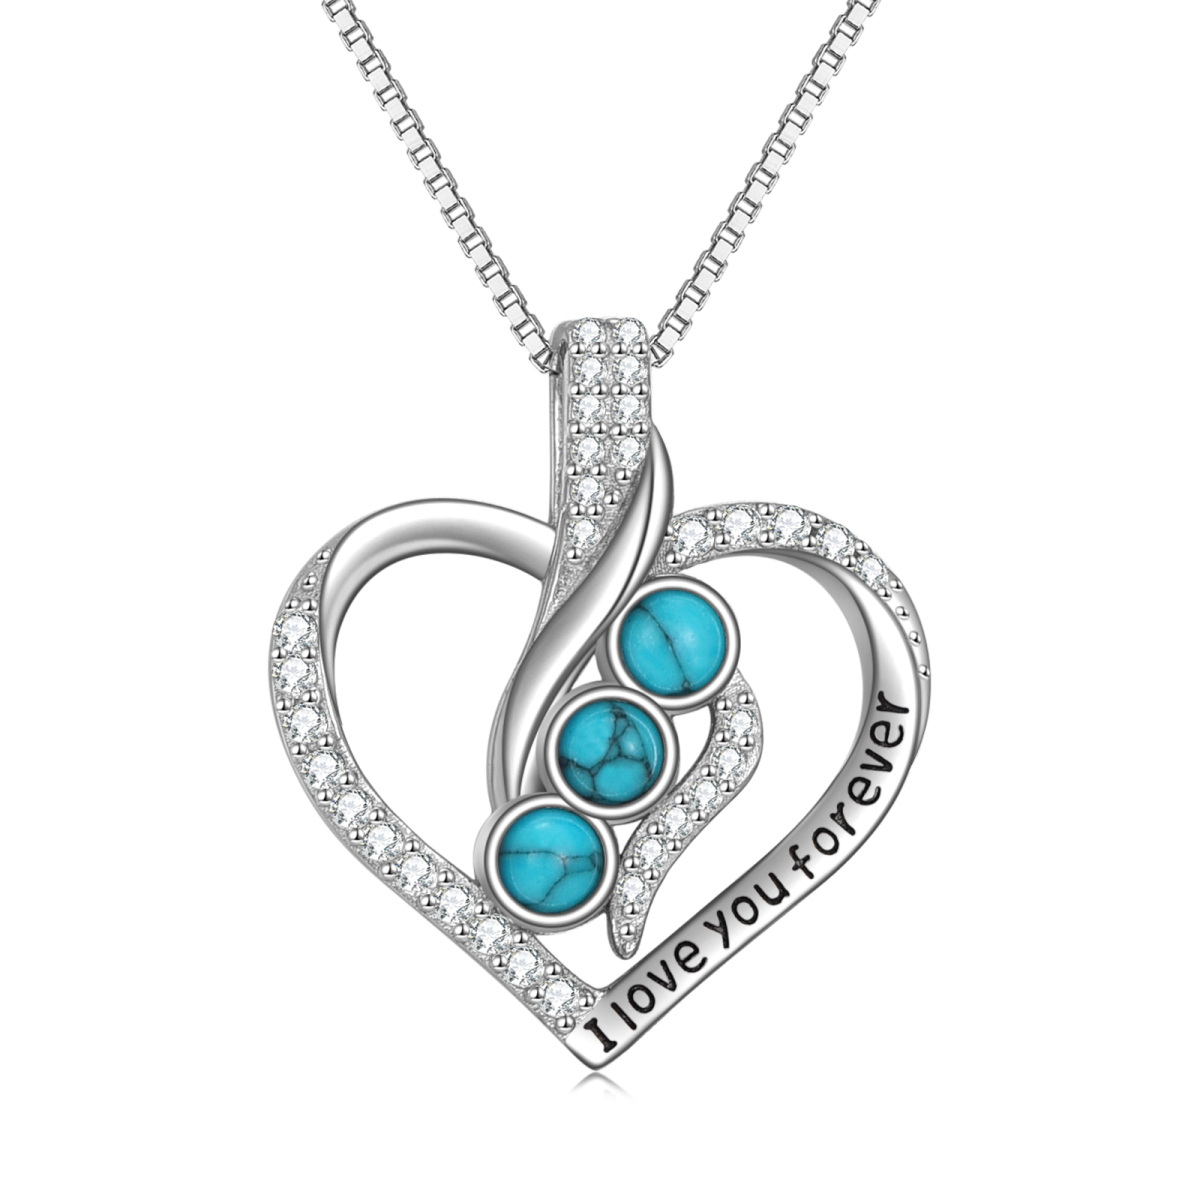 Sterling Silver Circular Shaped Opal Heart Pendant Necklace with Engraved Word-1